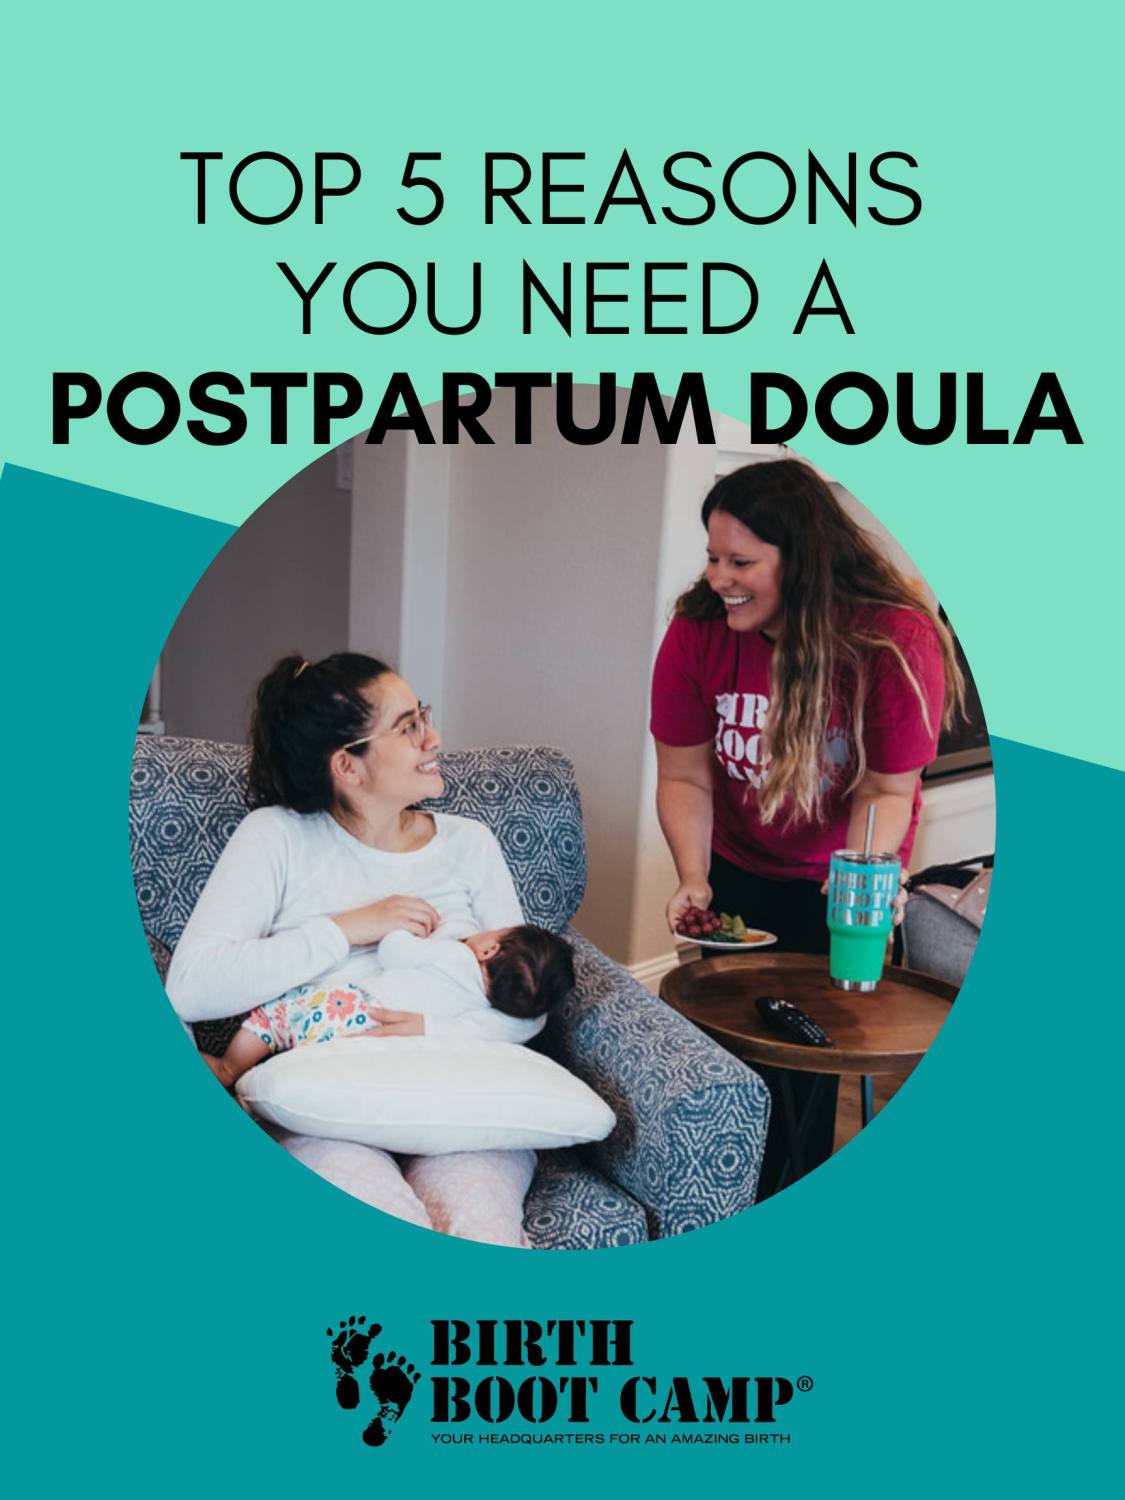 Top 5 Reasons You Need a Postpartum Doula